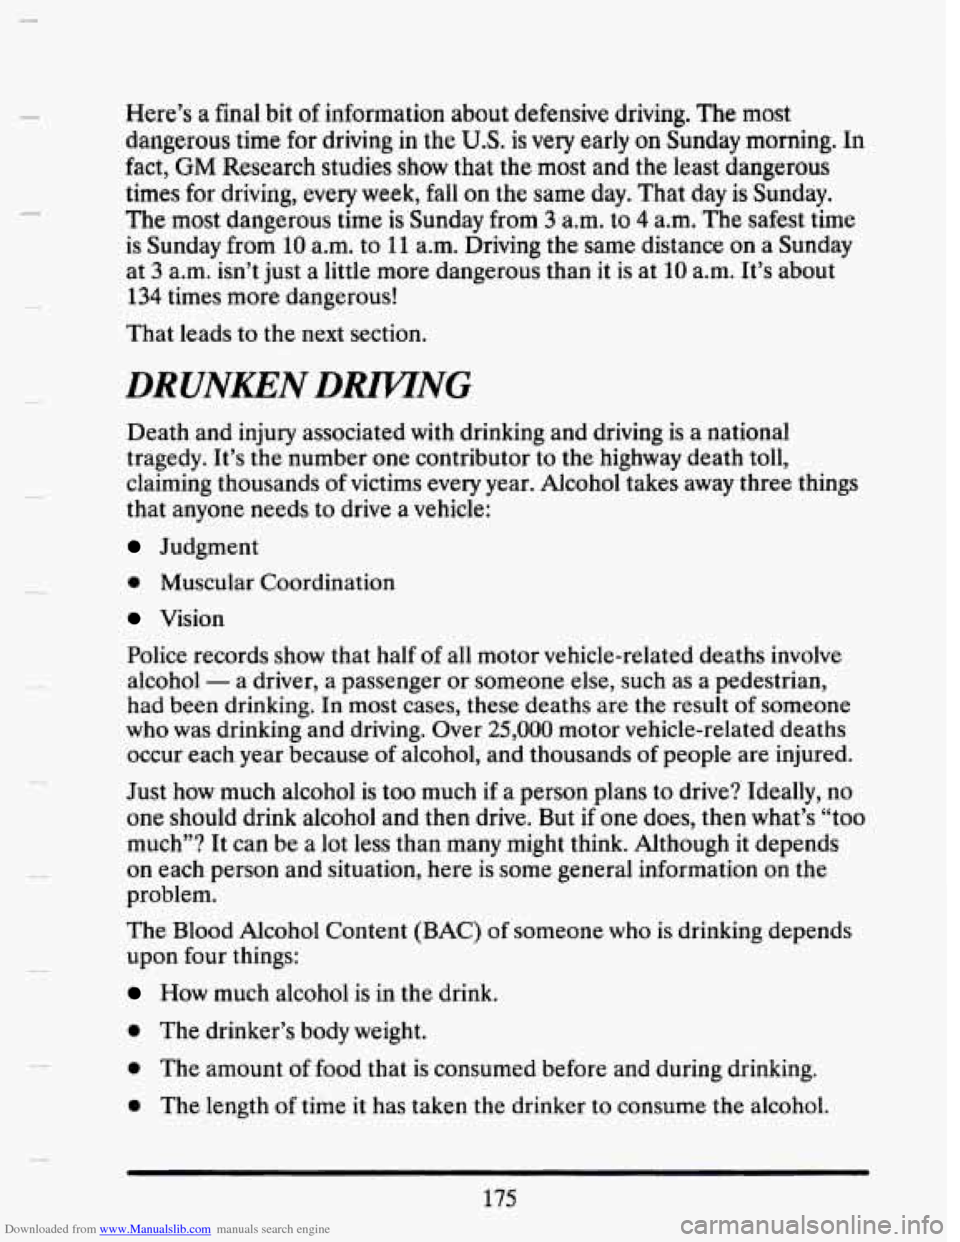 CADILLAC SEVILLE 1993 4.G Owners Manual Downloaded from www.Manualslib.com manuals search engine Here’s a final  bit of information  about defensive  driving. The most 
dangerous time 
for driving  in  the U.S. is very early on Sunday  mo